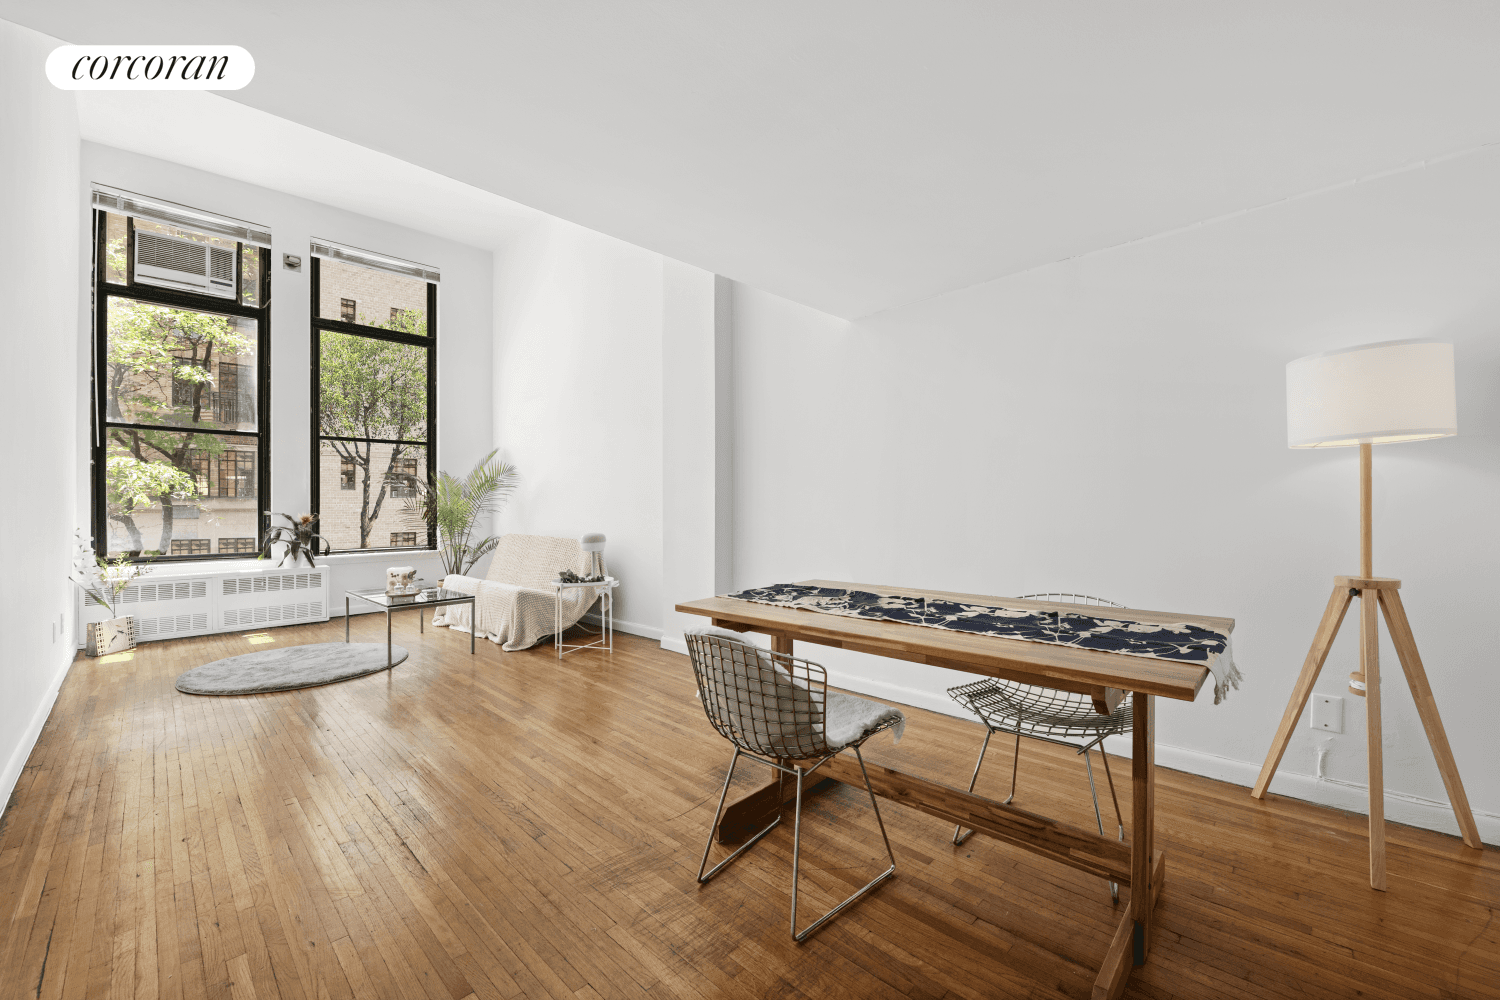 Welcome to 43 East 10th Street 2D, a stunning well priced loft style residence located in the heart of Greenwich Village, New York.